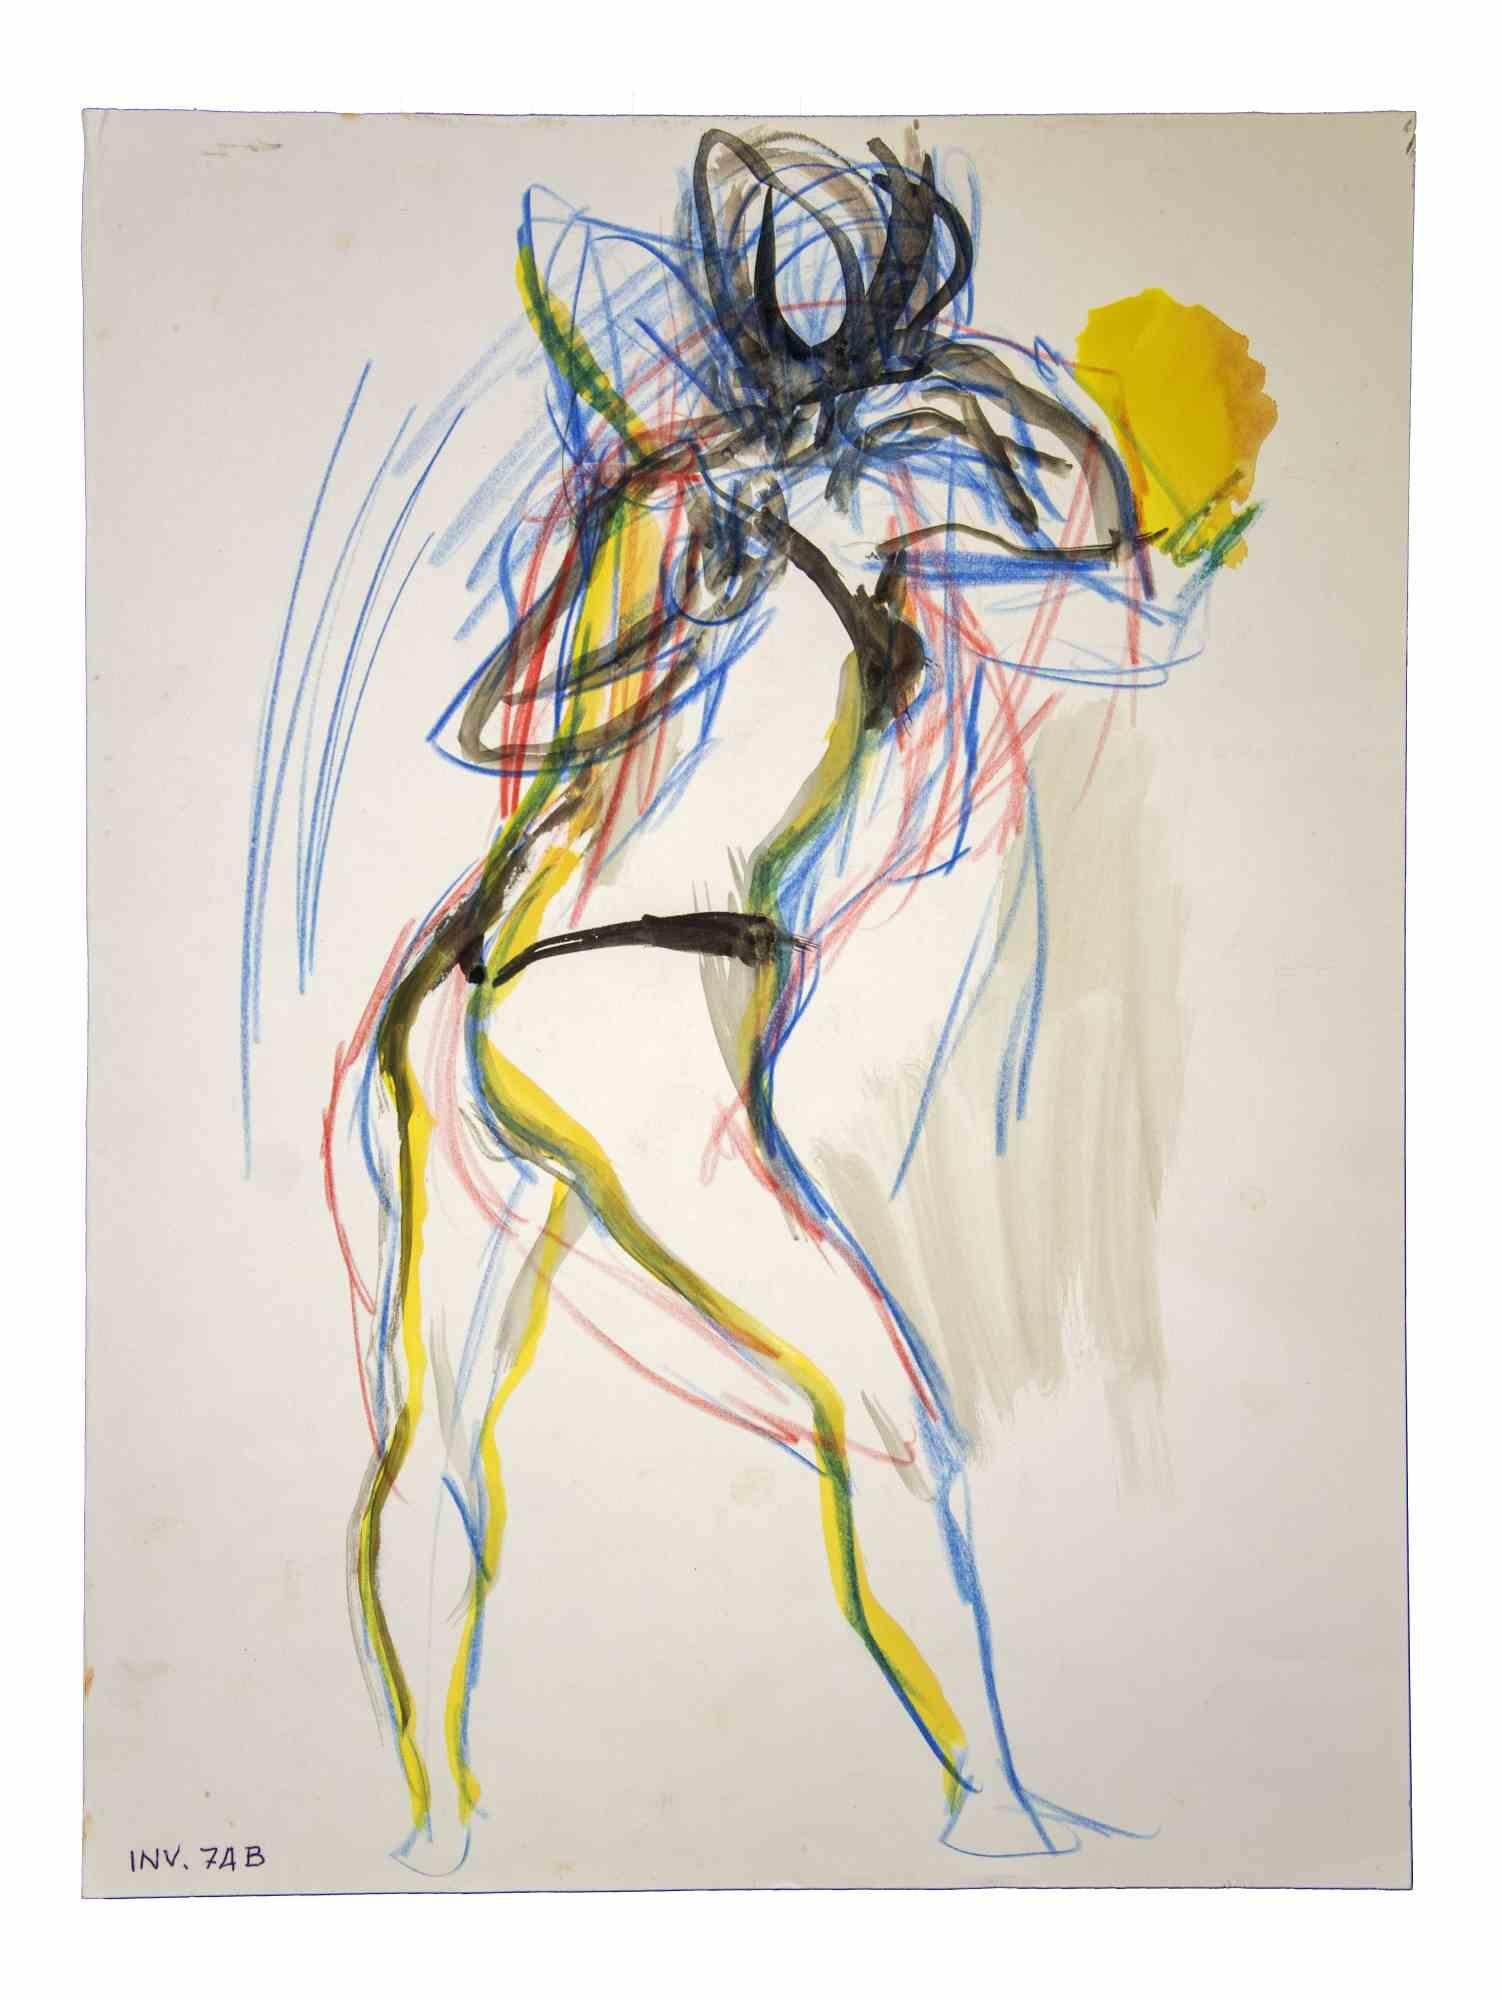 Figure is an original artwork realized in the 1970s by the Italian Contemporary artist  Leo Guida  (1992 - 2017).

Original drawings in Oil Pastel and Watercolor on paper.

Good conditions but aged.

The artwork is depicted through strong strokes in